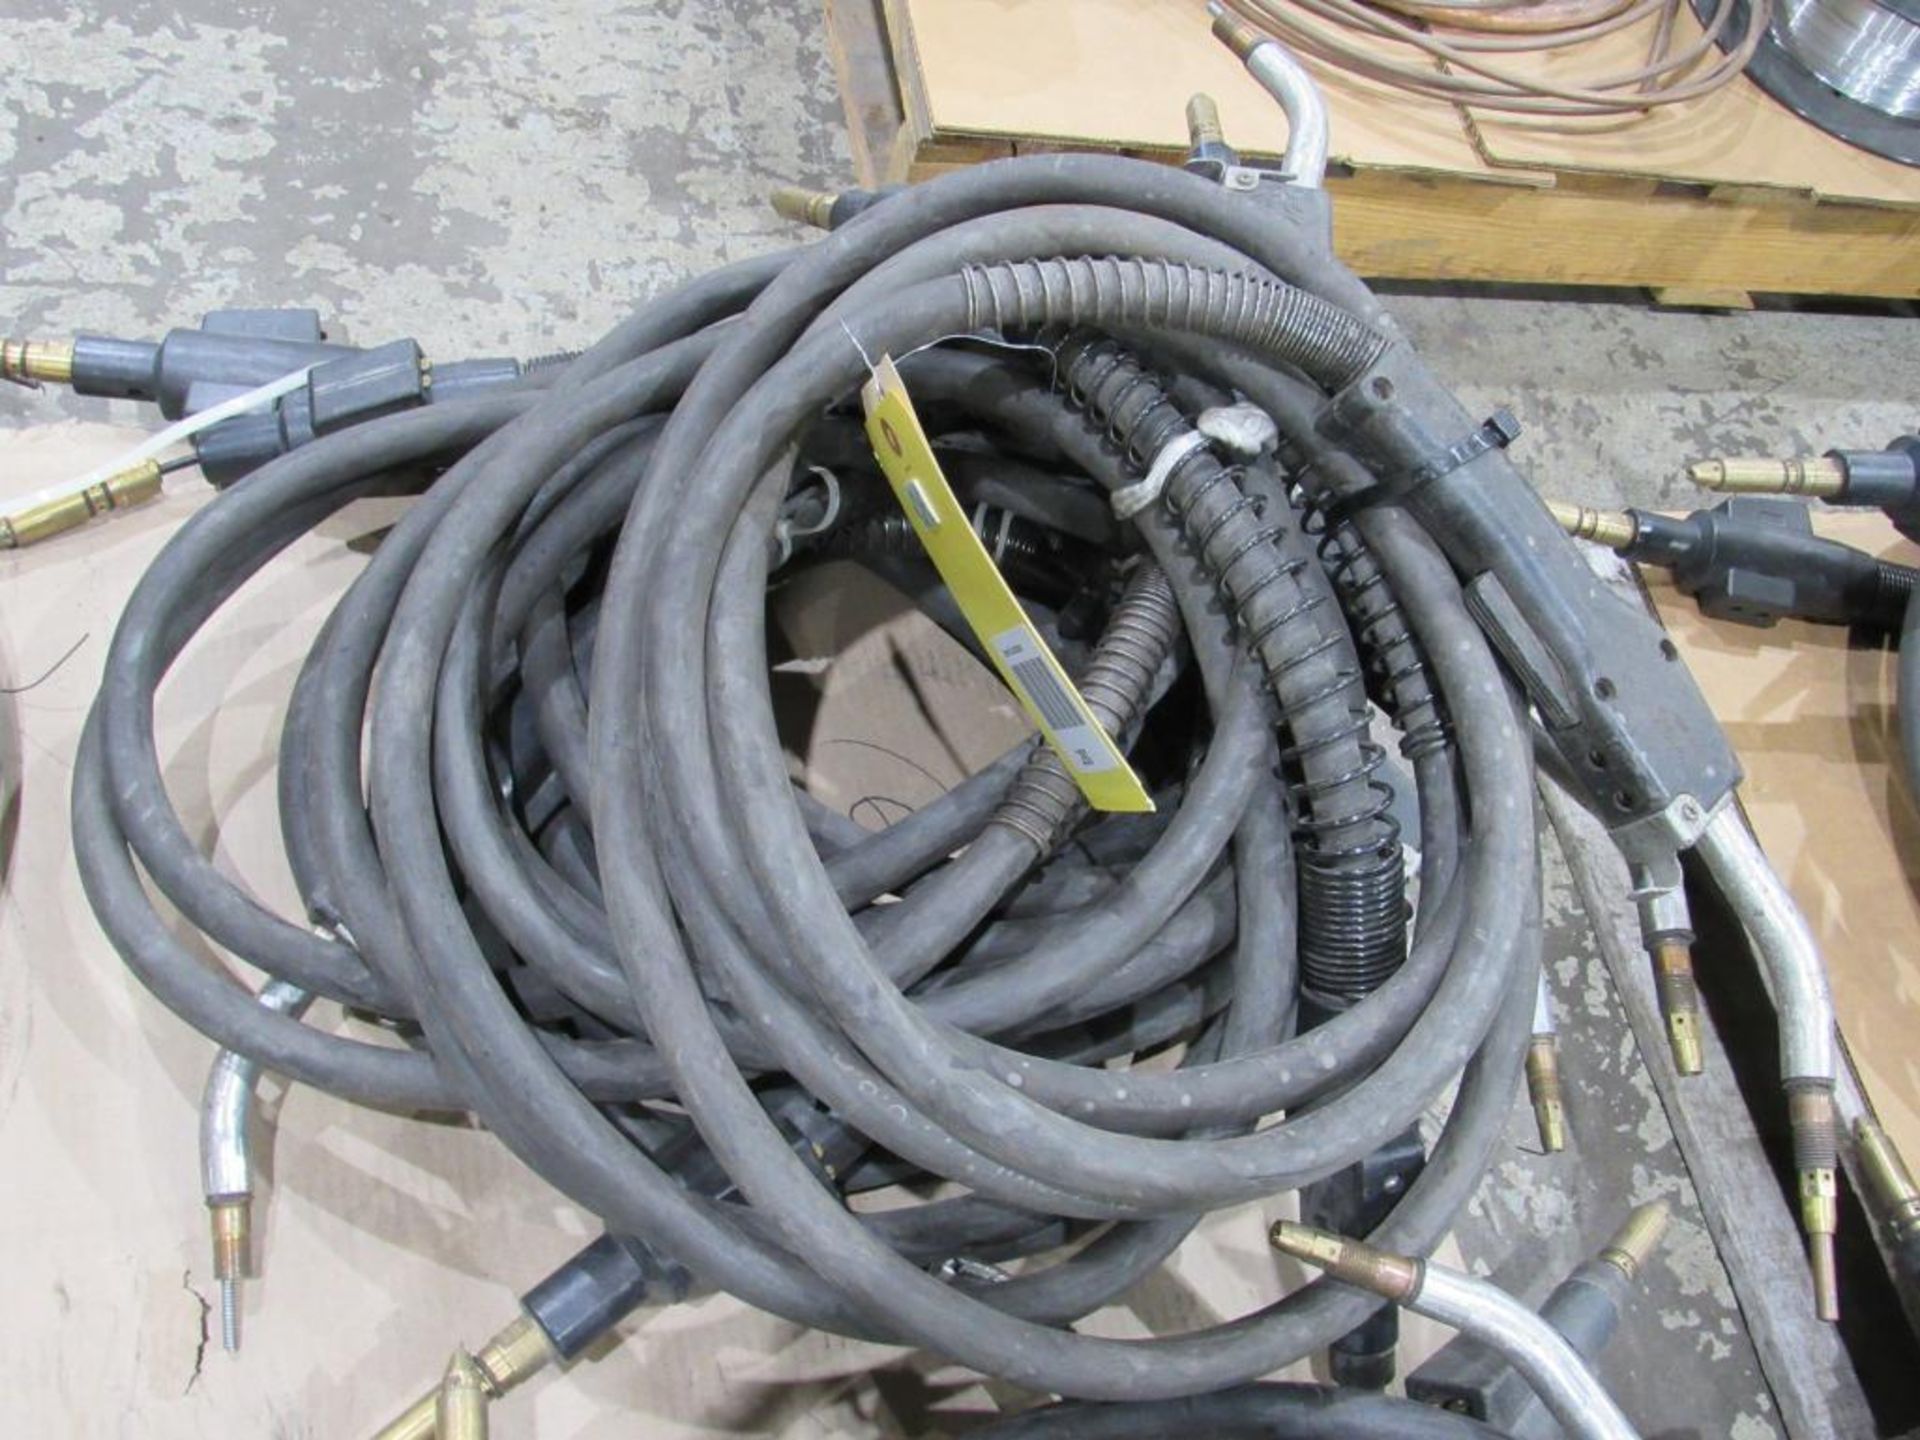 Lot of 6: Welding Cables and Guns - Image 3 of 3